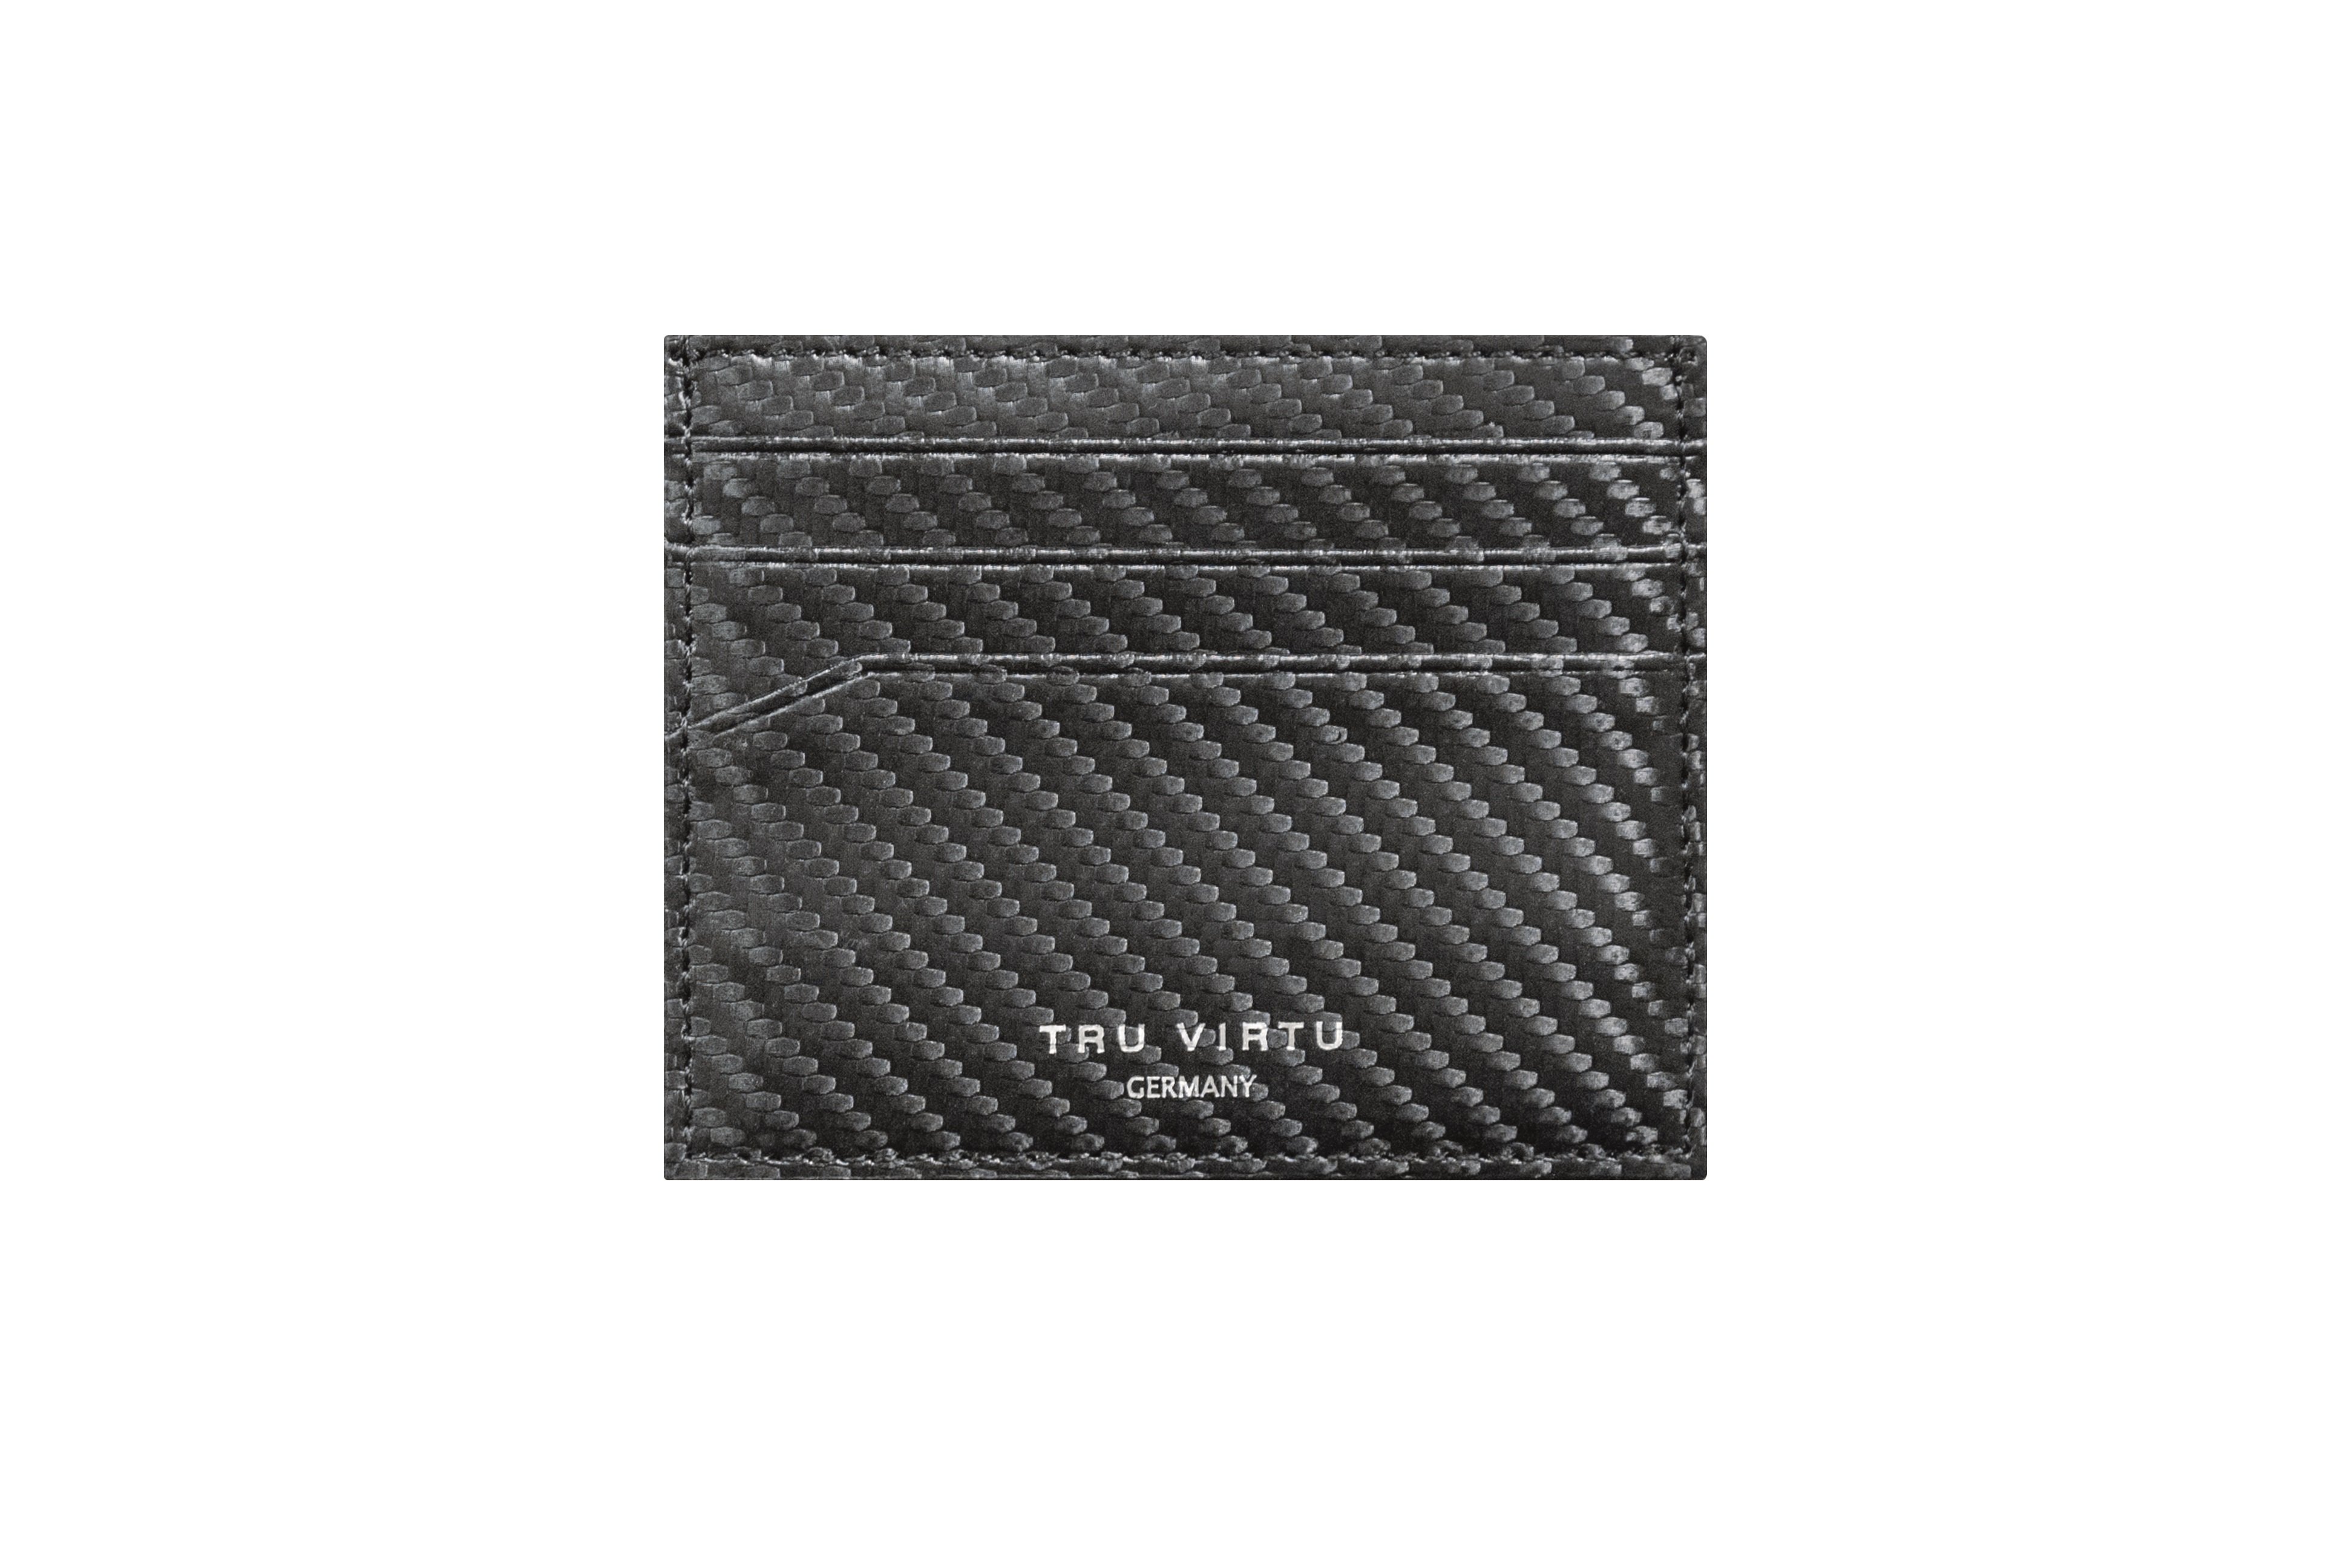 Free TRU VIRTU® WALLET SOFT HI-TECH LEATHER with every purchase of 2 TRU VIRTU® products. While stocks last.